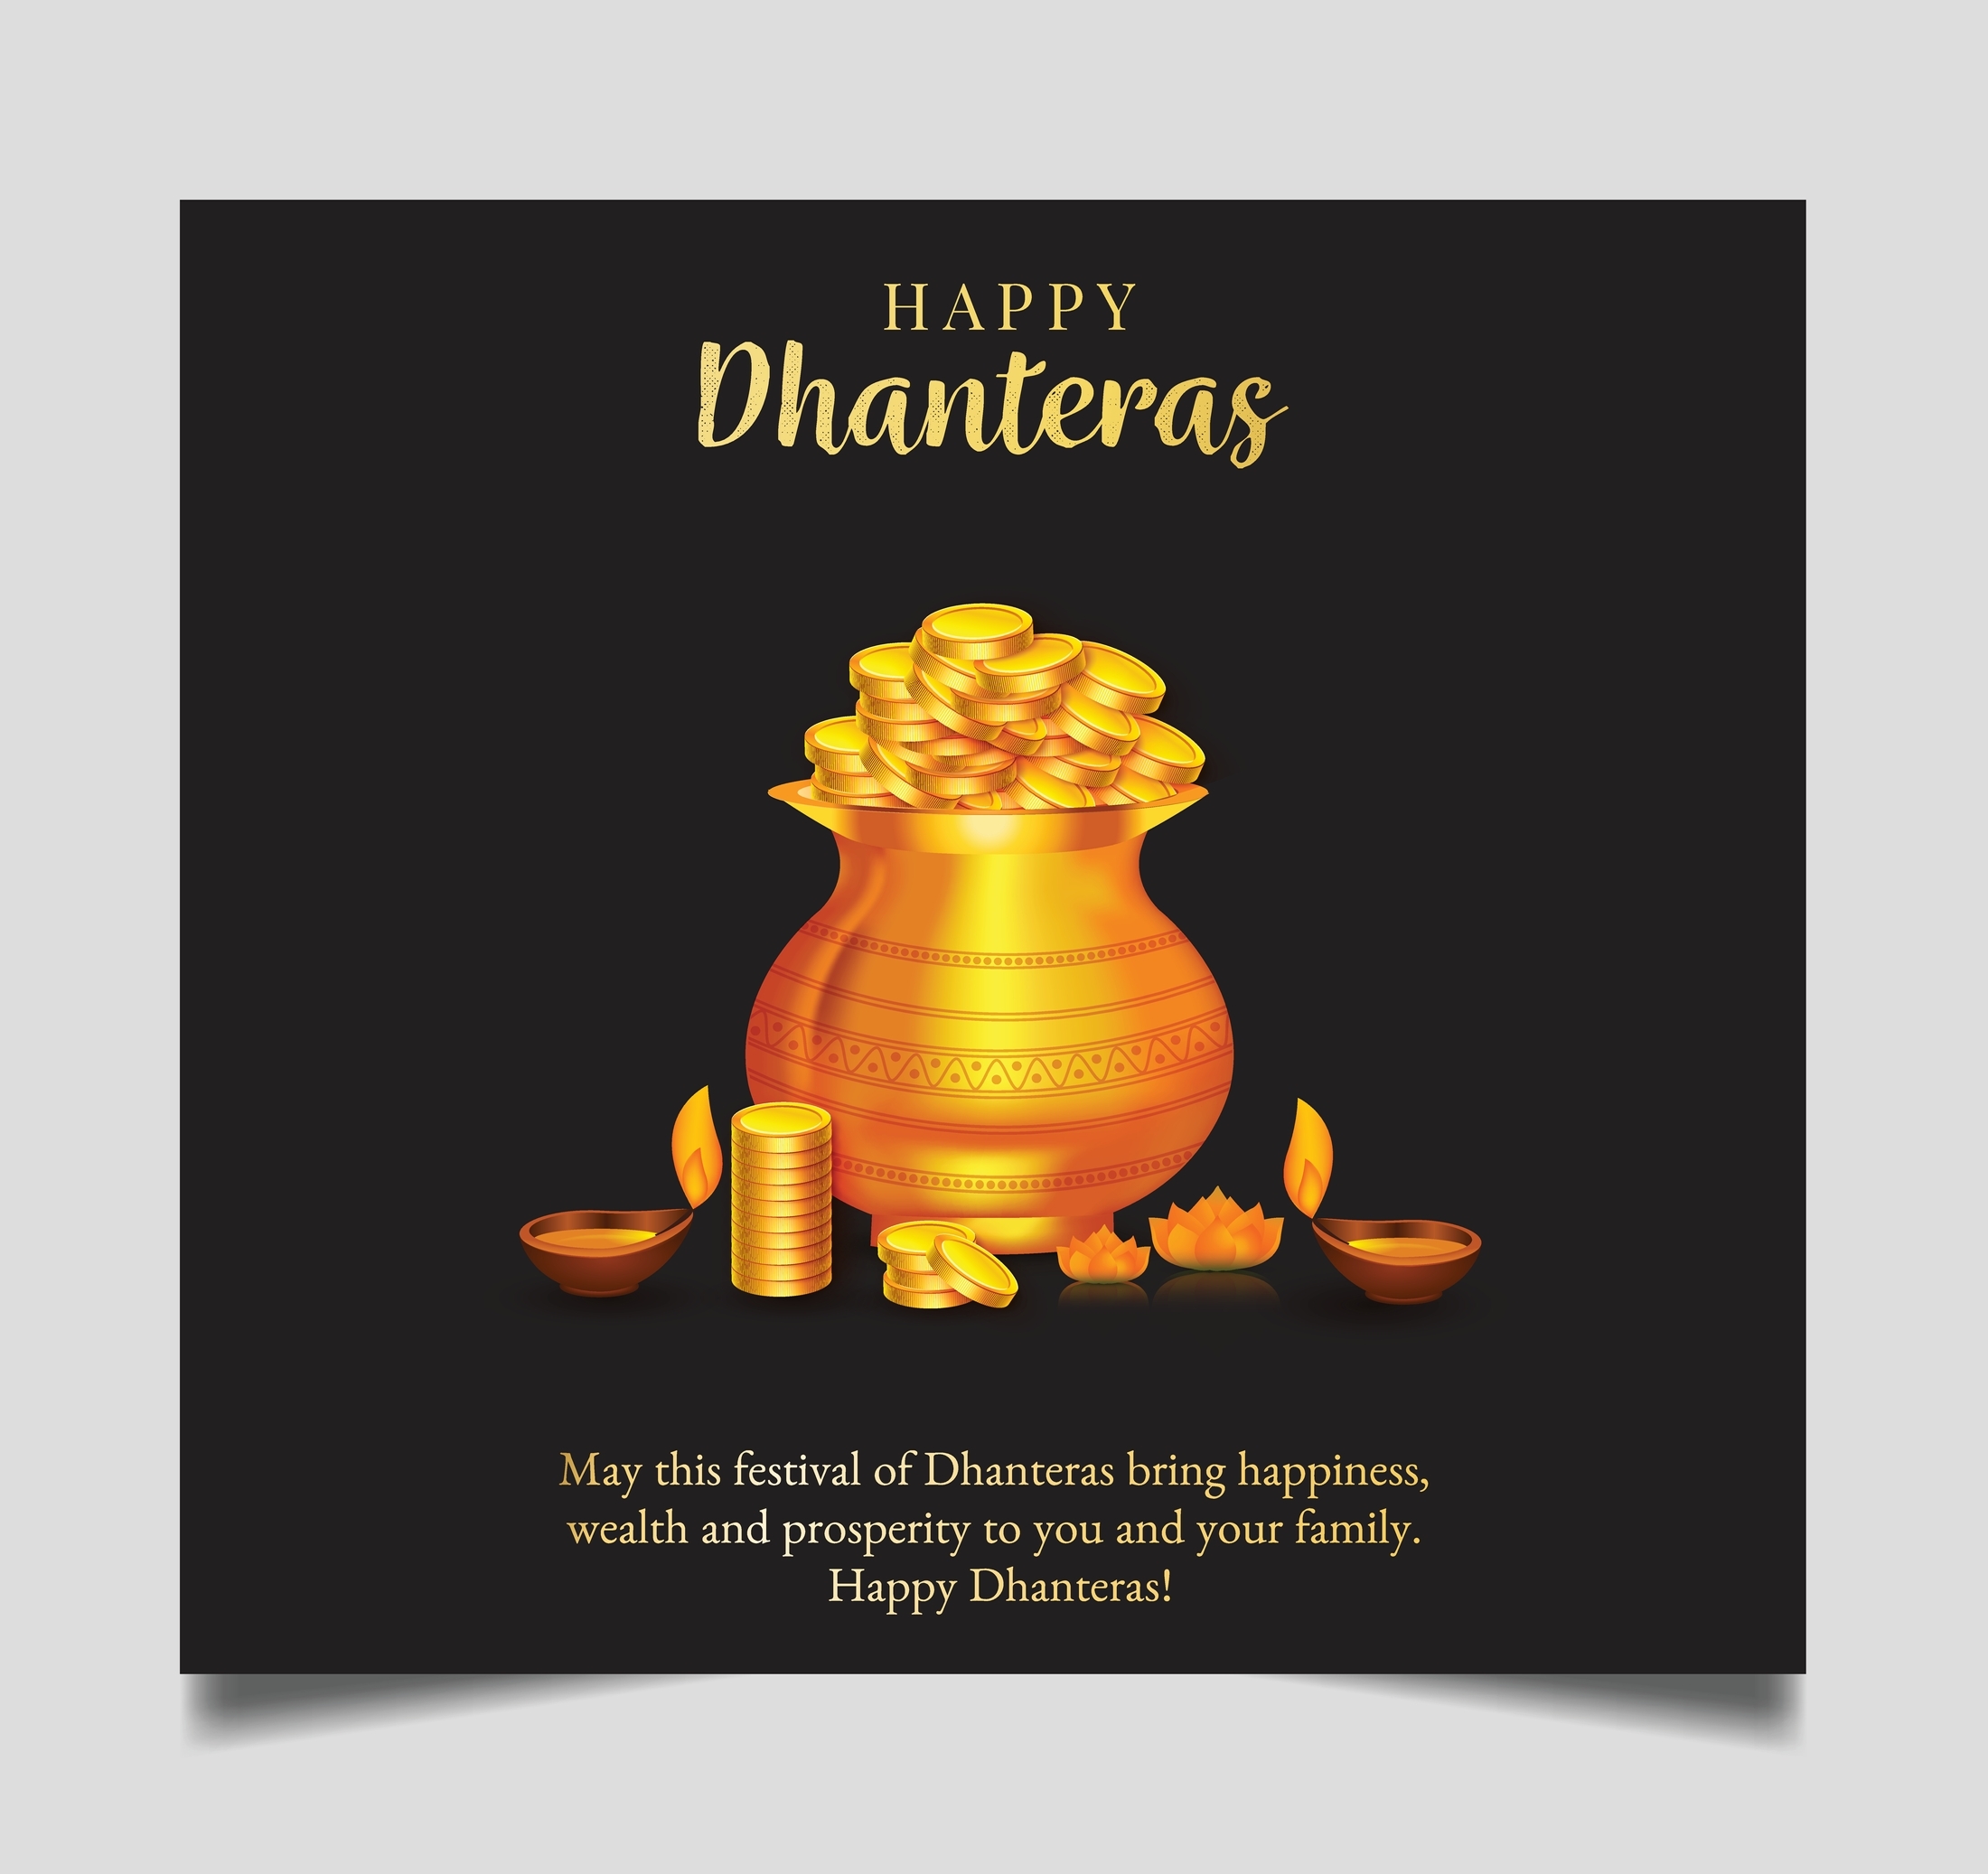 Happy Dhanteras 2021: Images, Wishes, Quotes, Messages and WhatsApp Wishes  to Share on Dhantrayodashi - Bharat Times English News